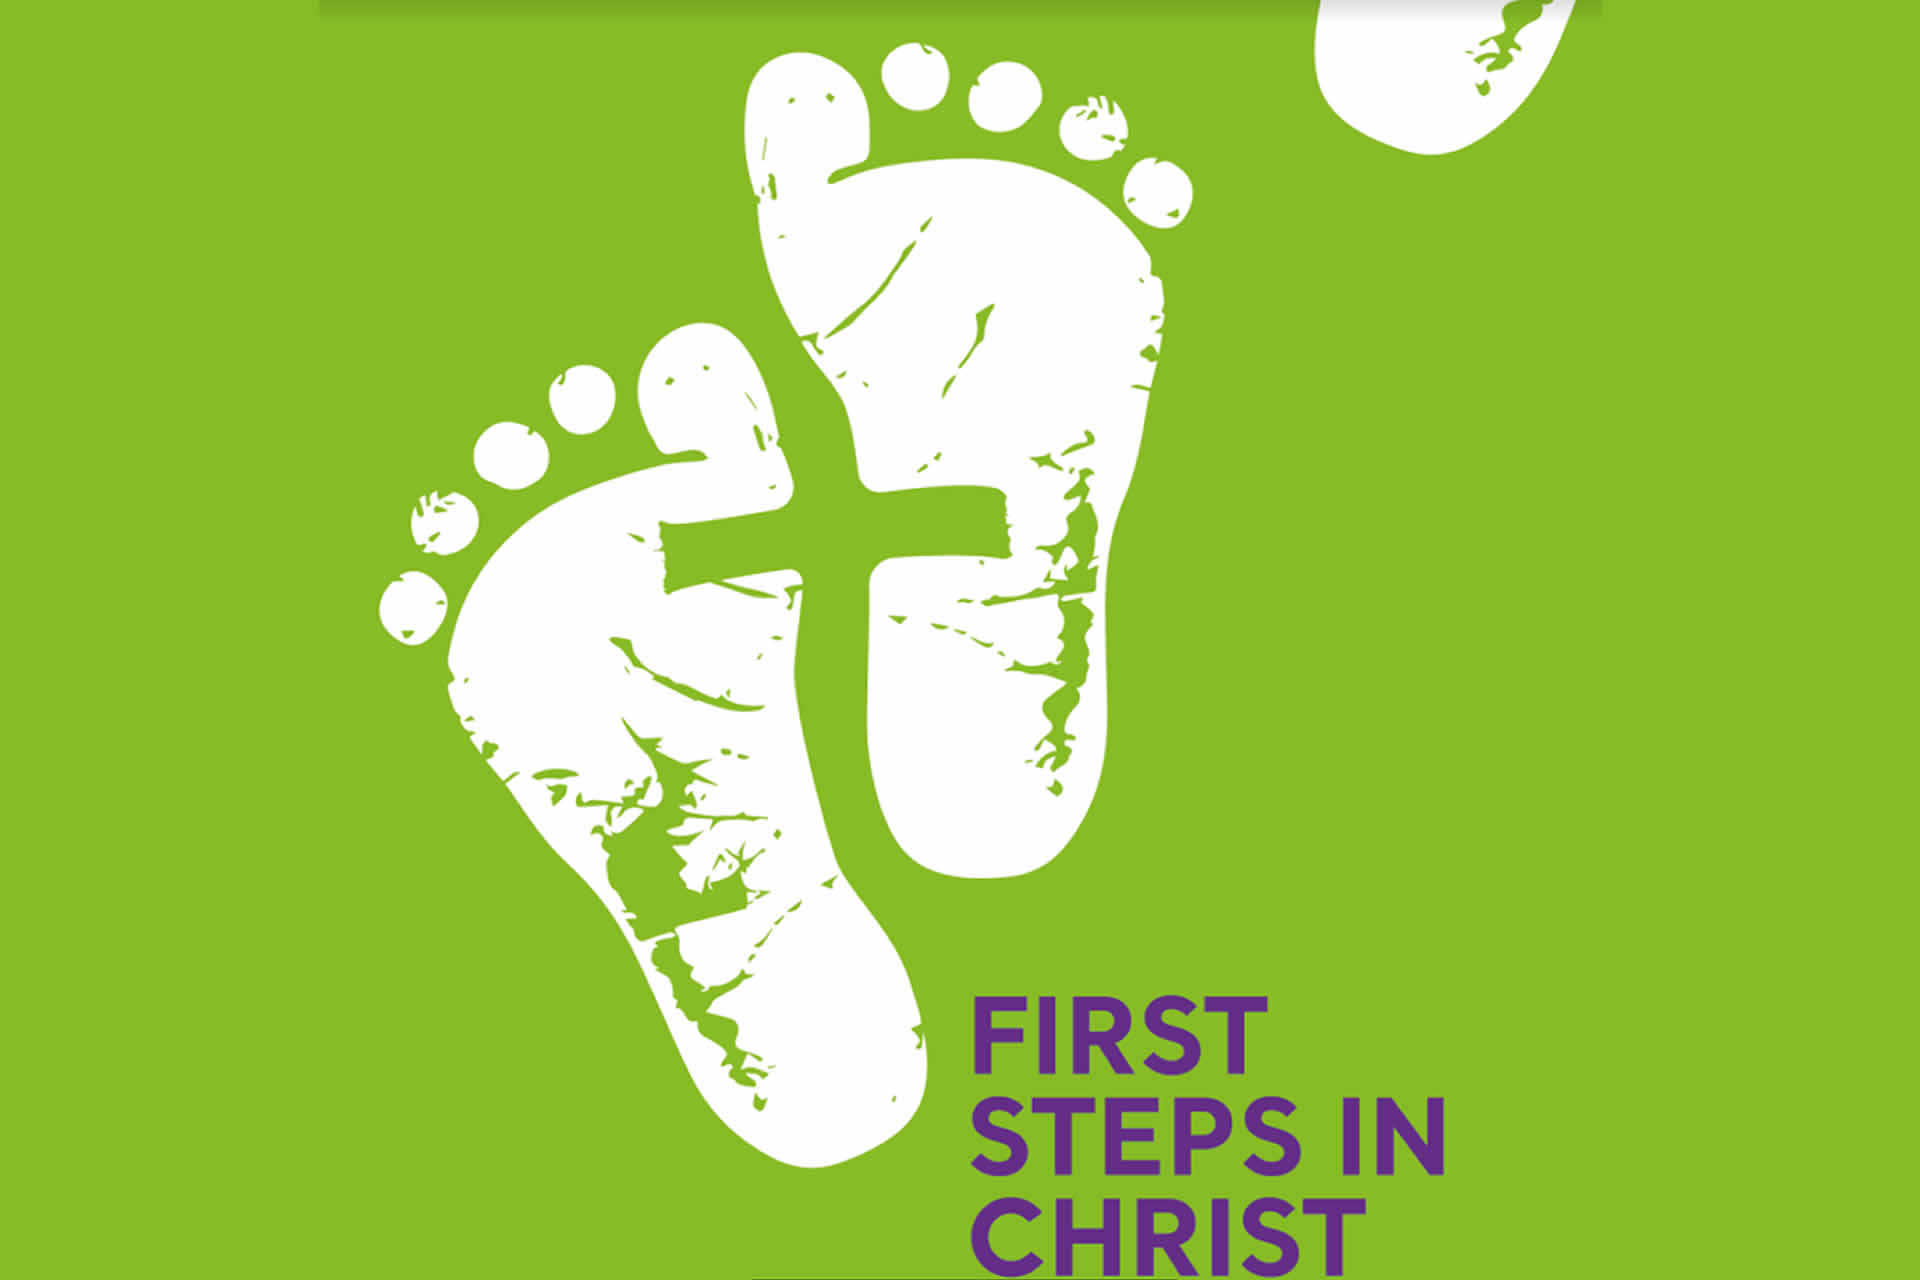 FIRST STEPS IN CHRIST